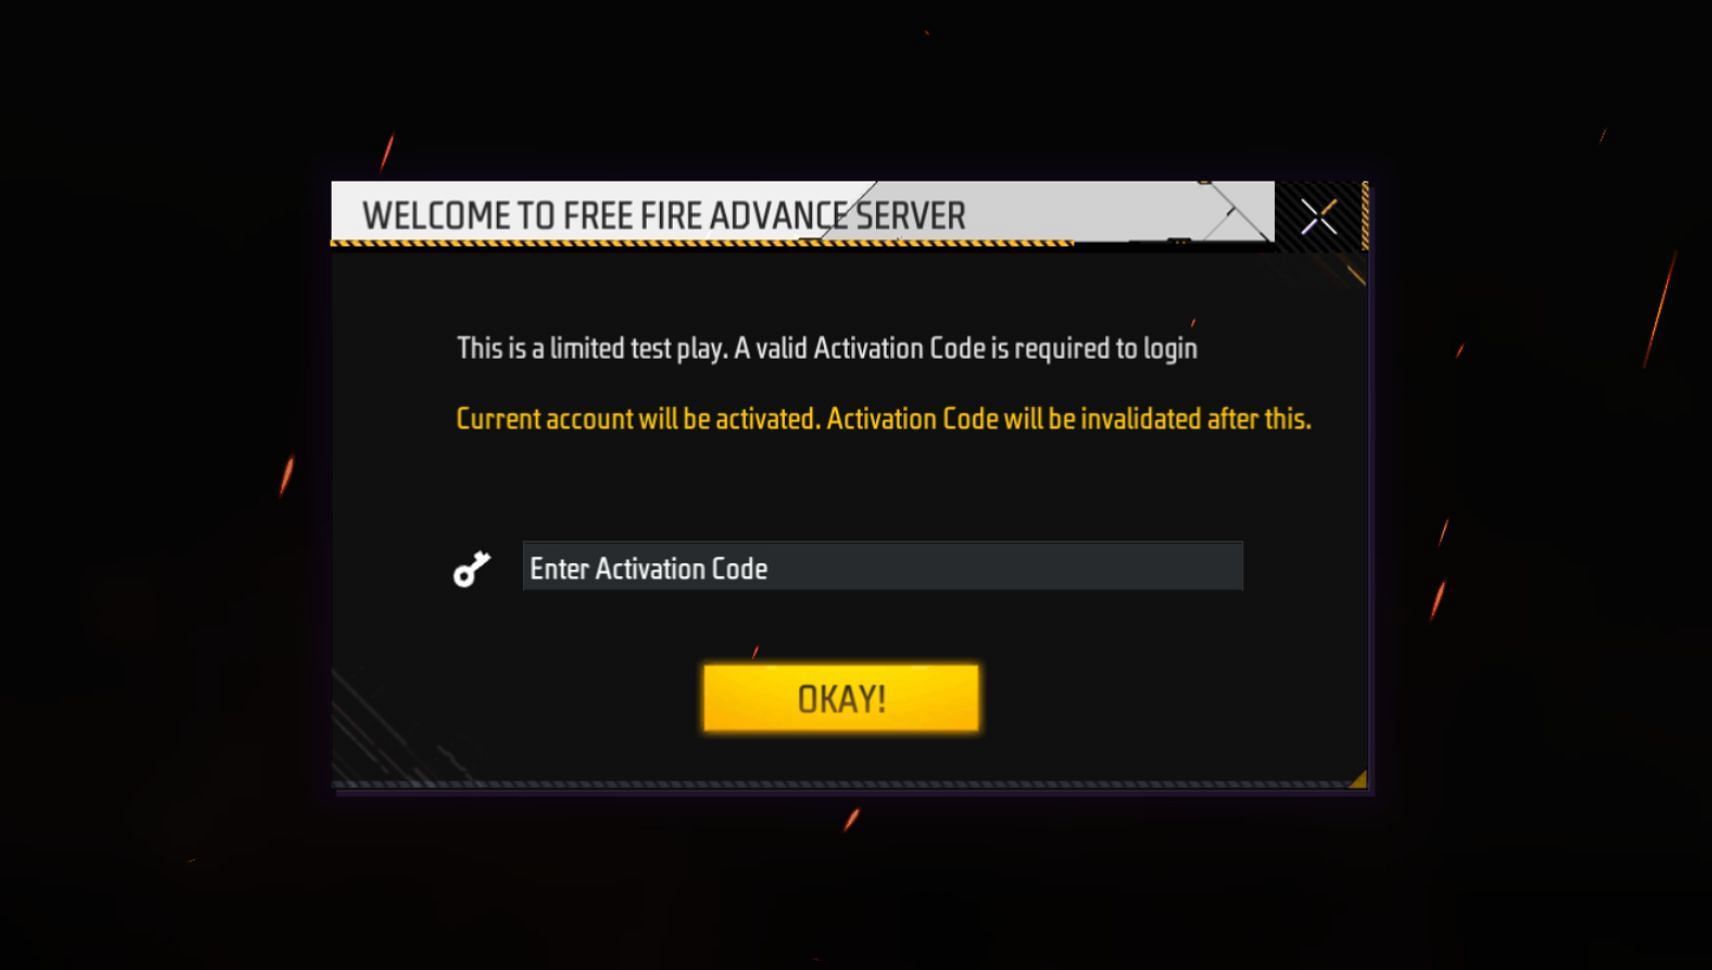 Gamers will need an Activation Code to activate Free Fire Advance Server (Image via Garena)